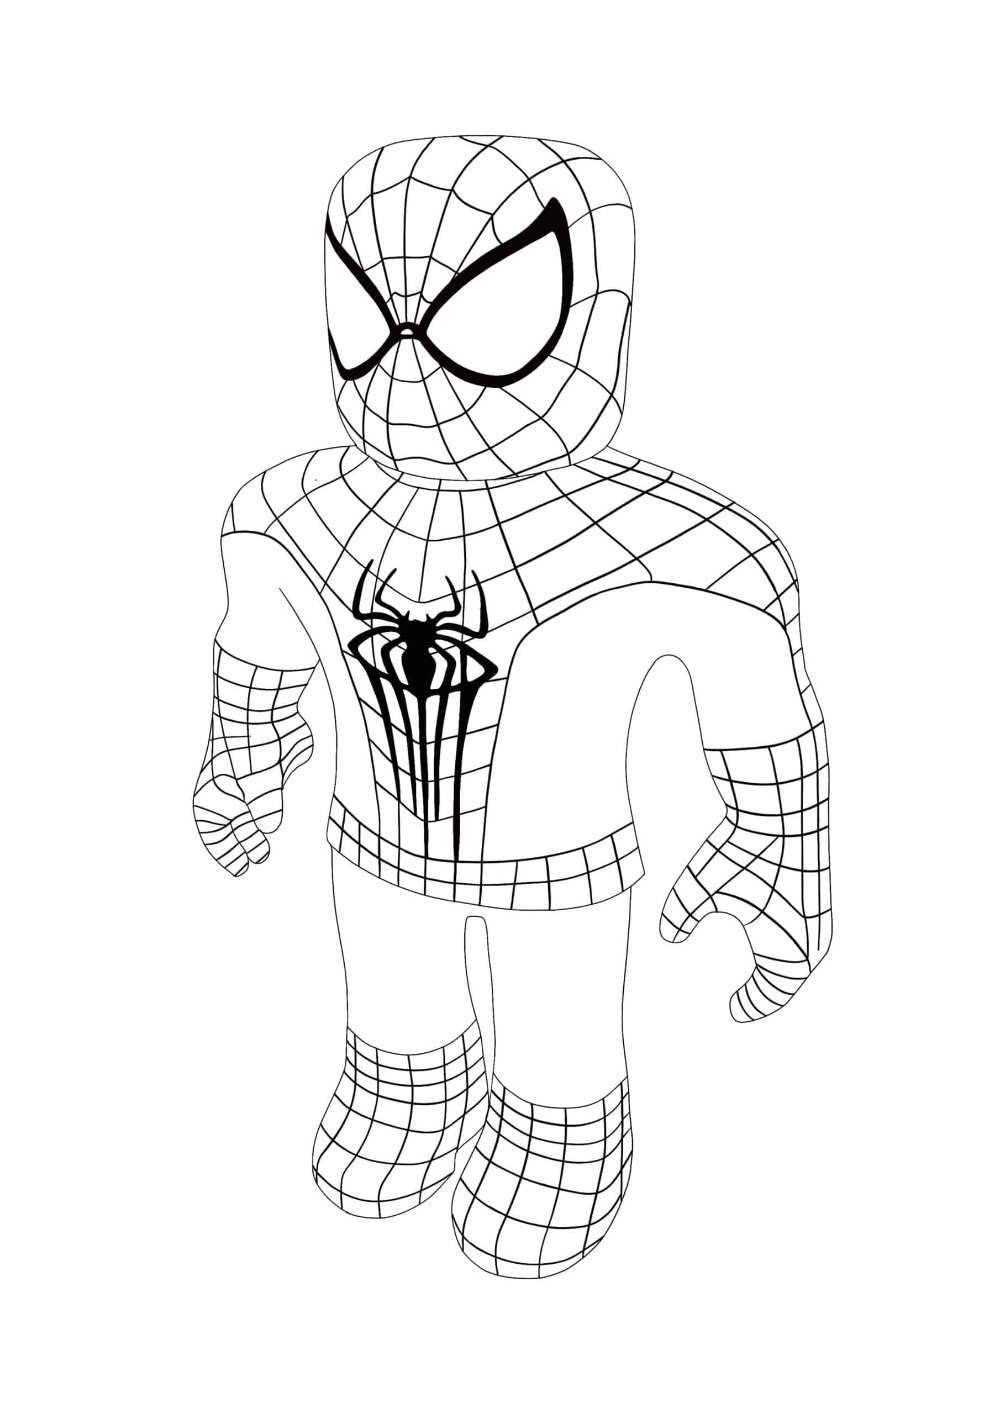 Roblox spiderman coloring pages